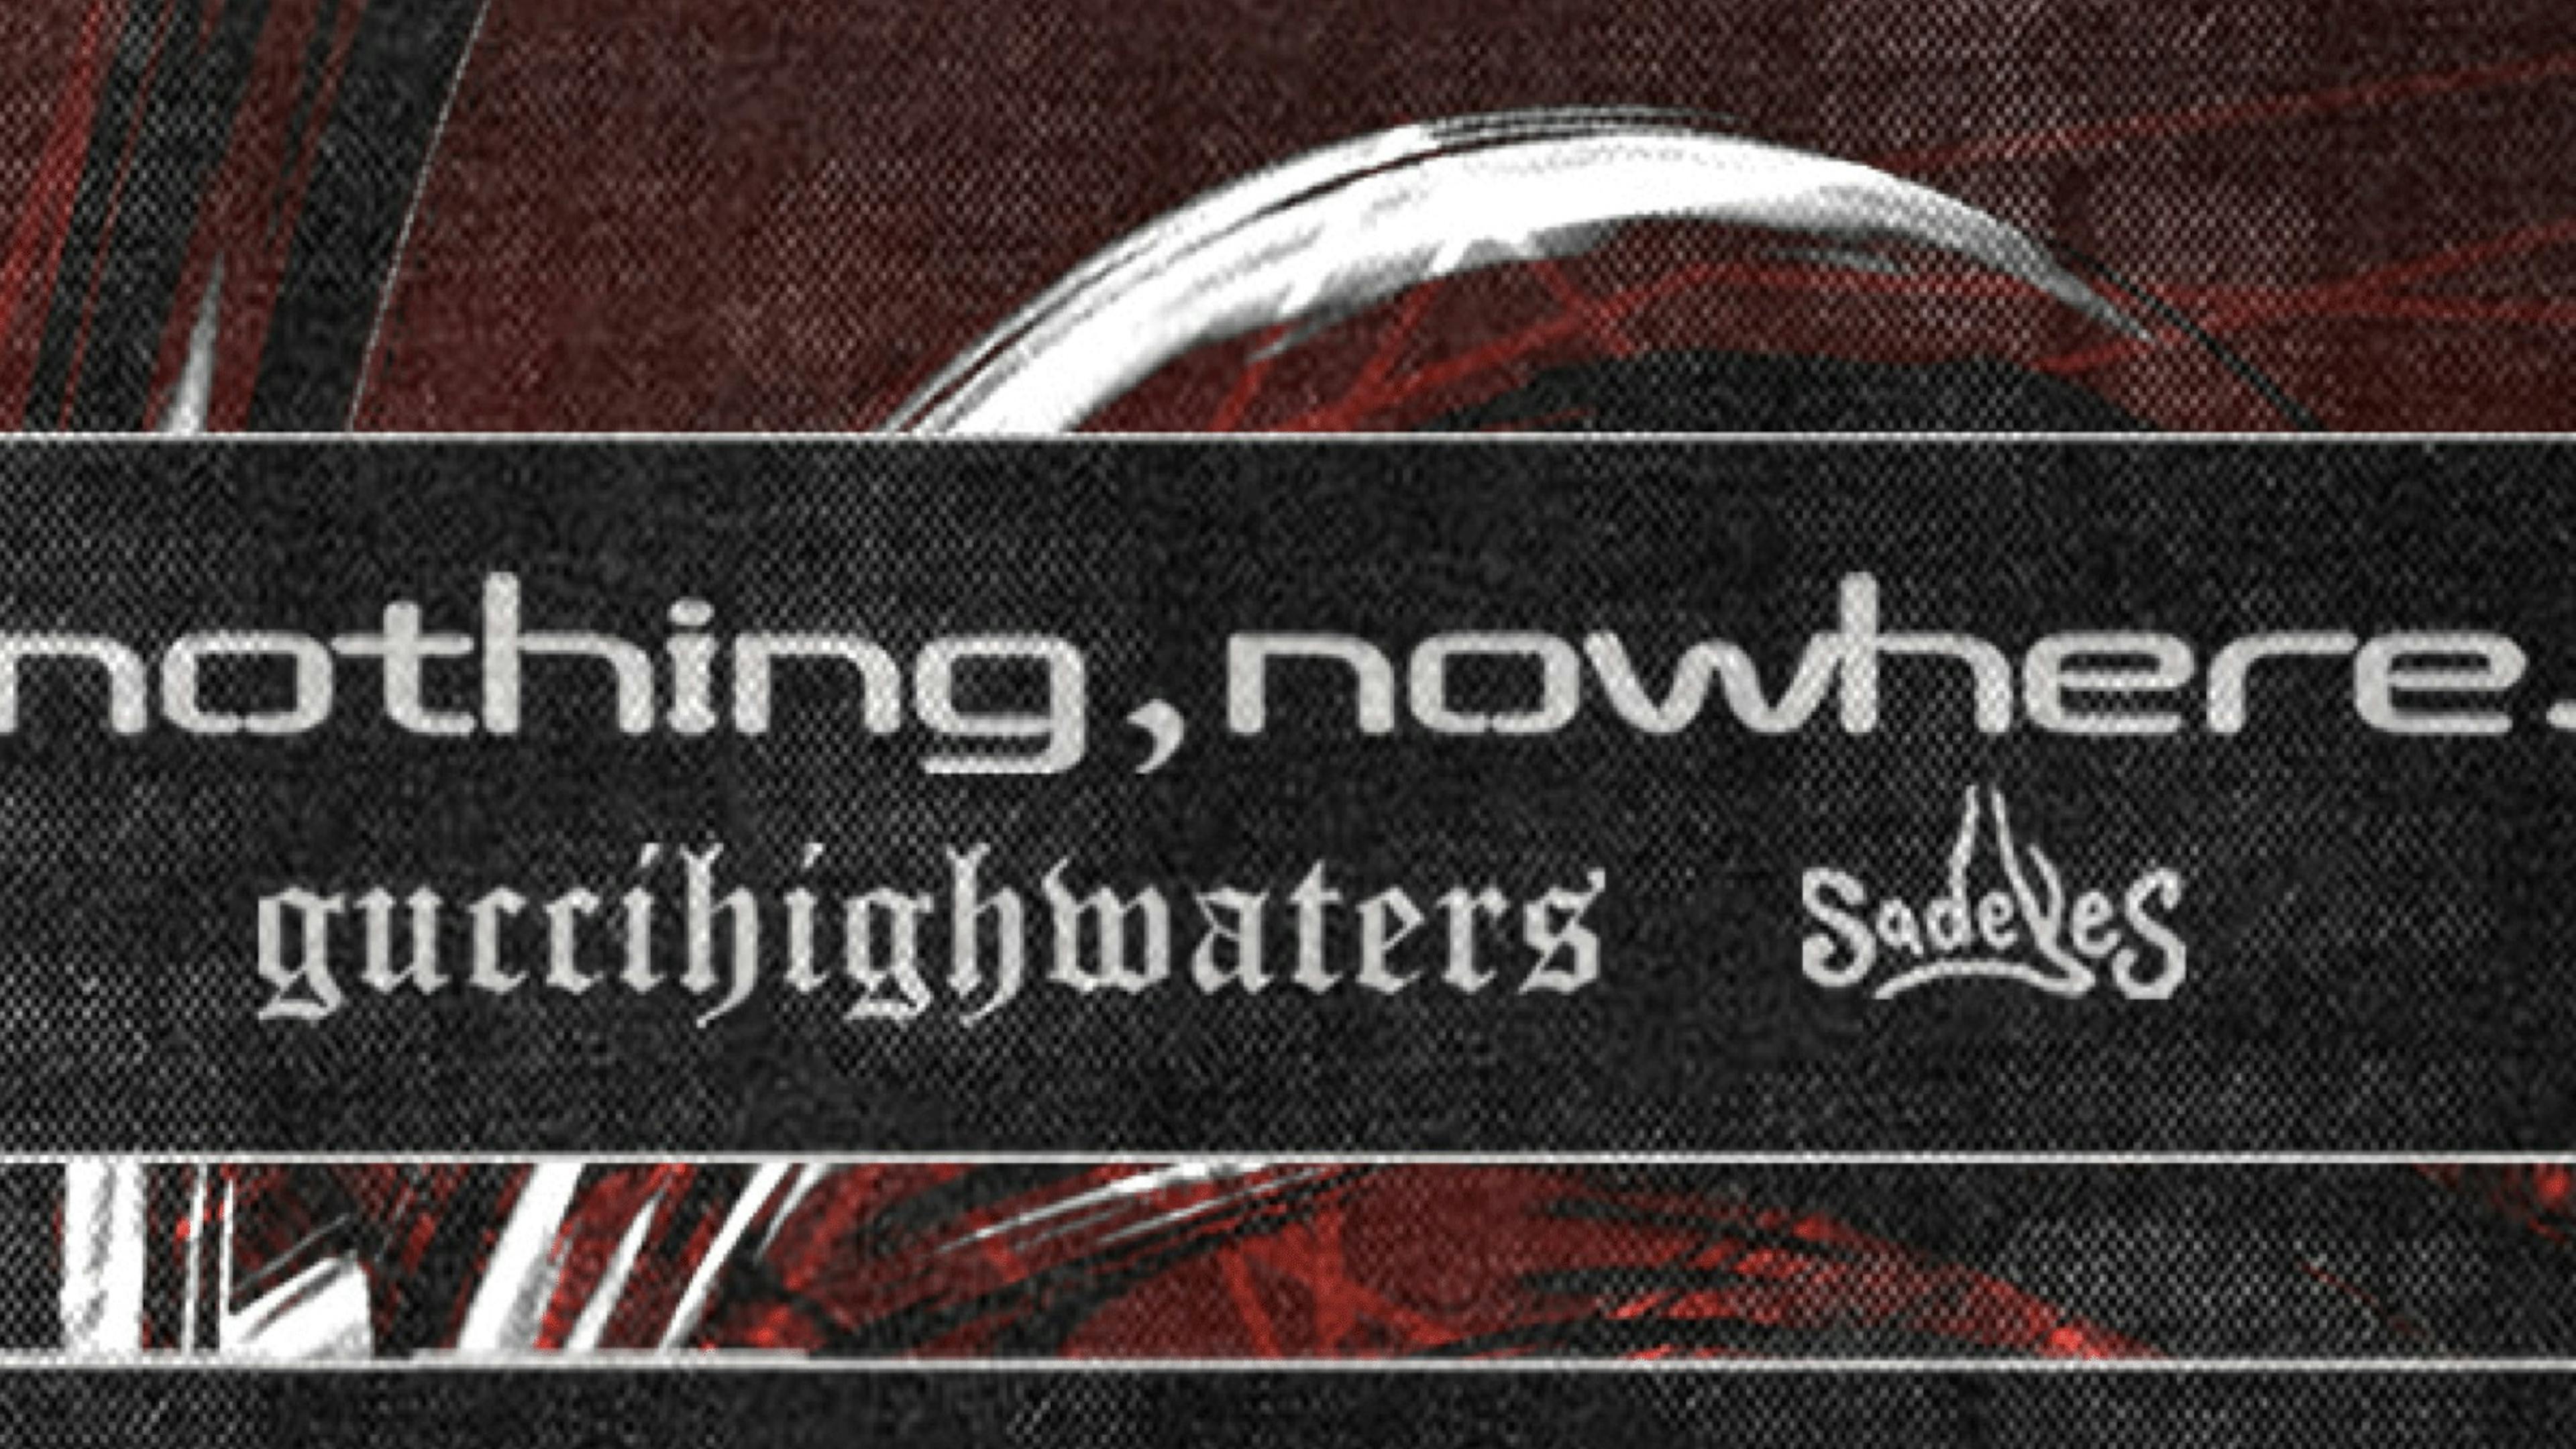 nothing,nowhere. announces UK tour with guccihighwaters and sadeyes